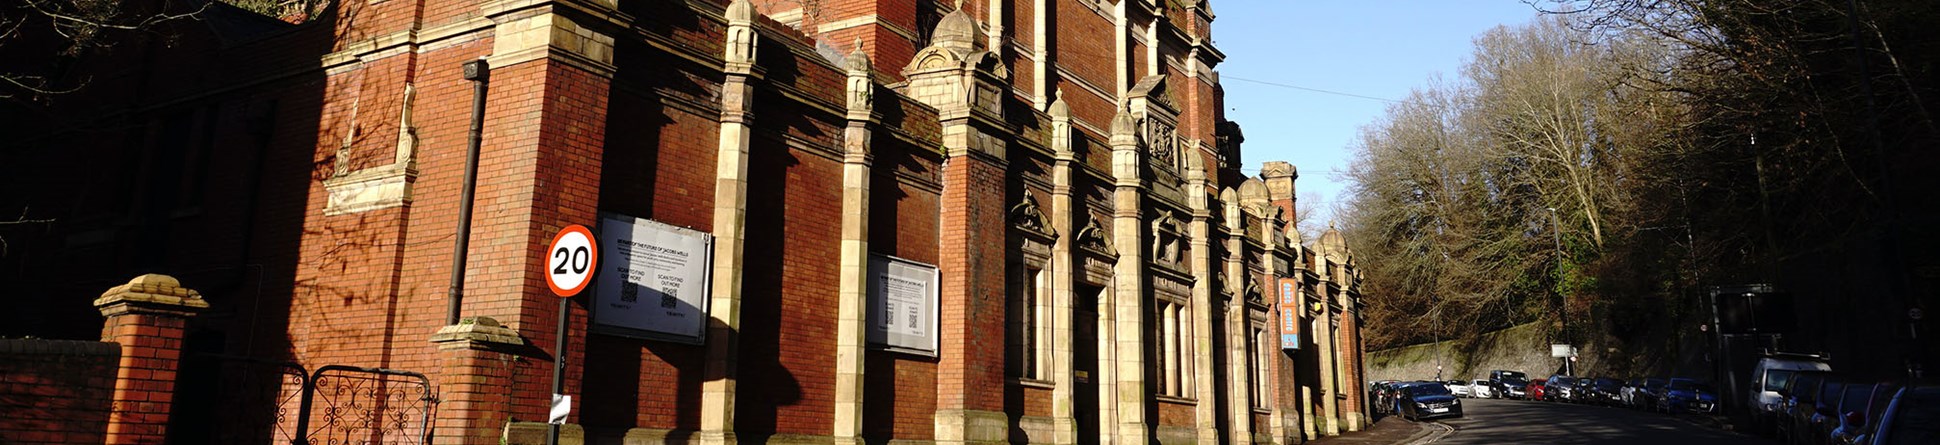 A photograph of the front of a large red brick building with ornate terracotta details facing onto an urban street. The roof has a temporary covering and the building is in poor repair.